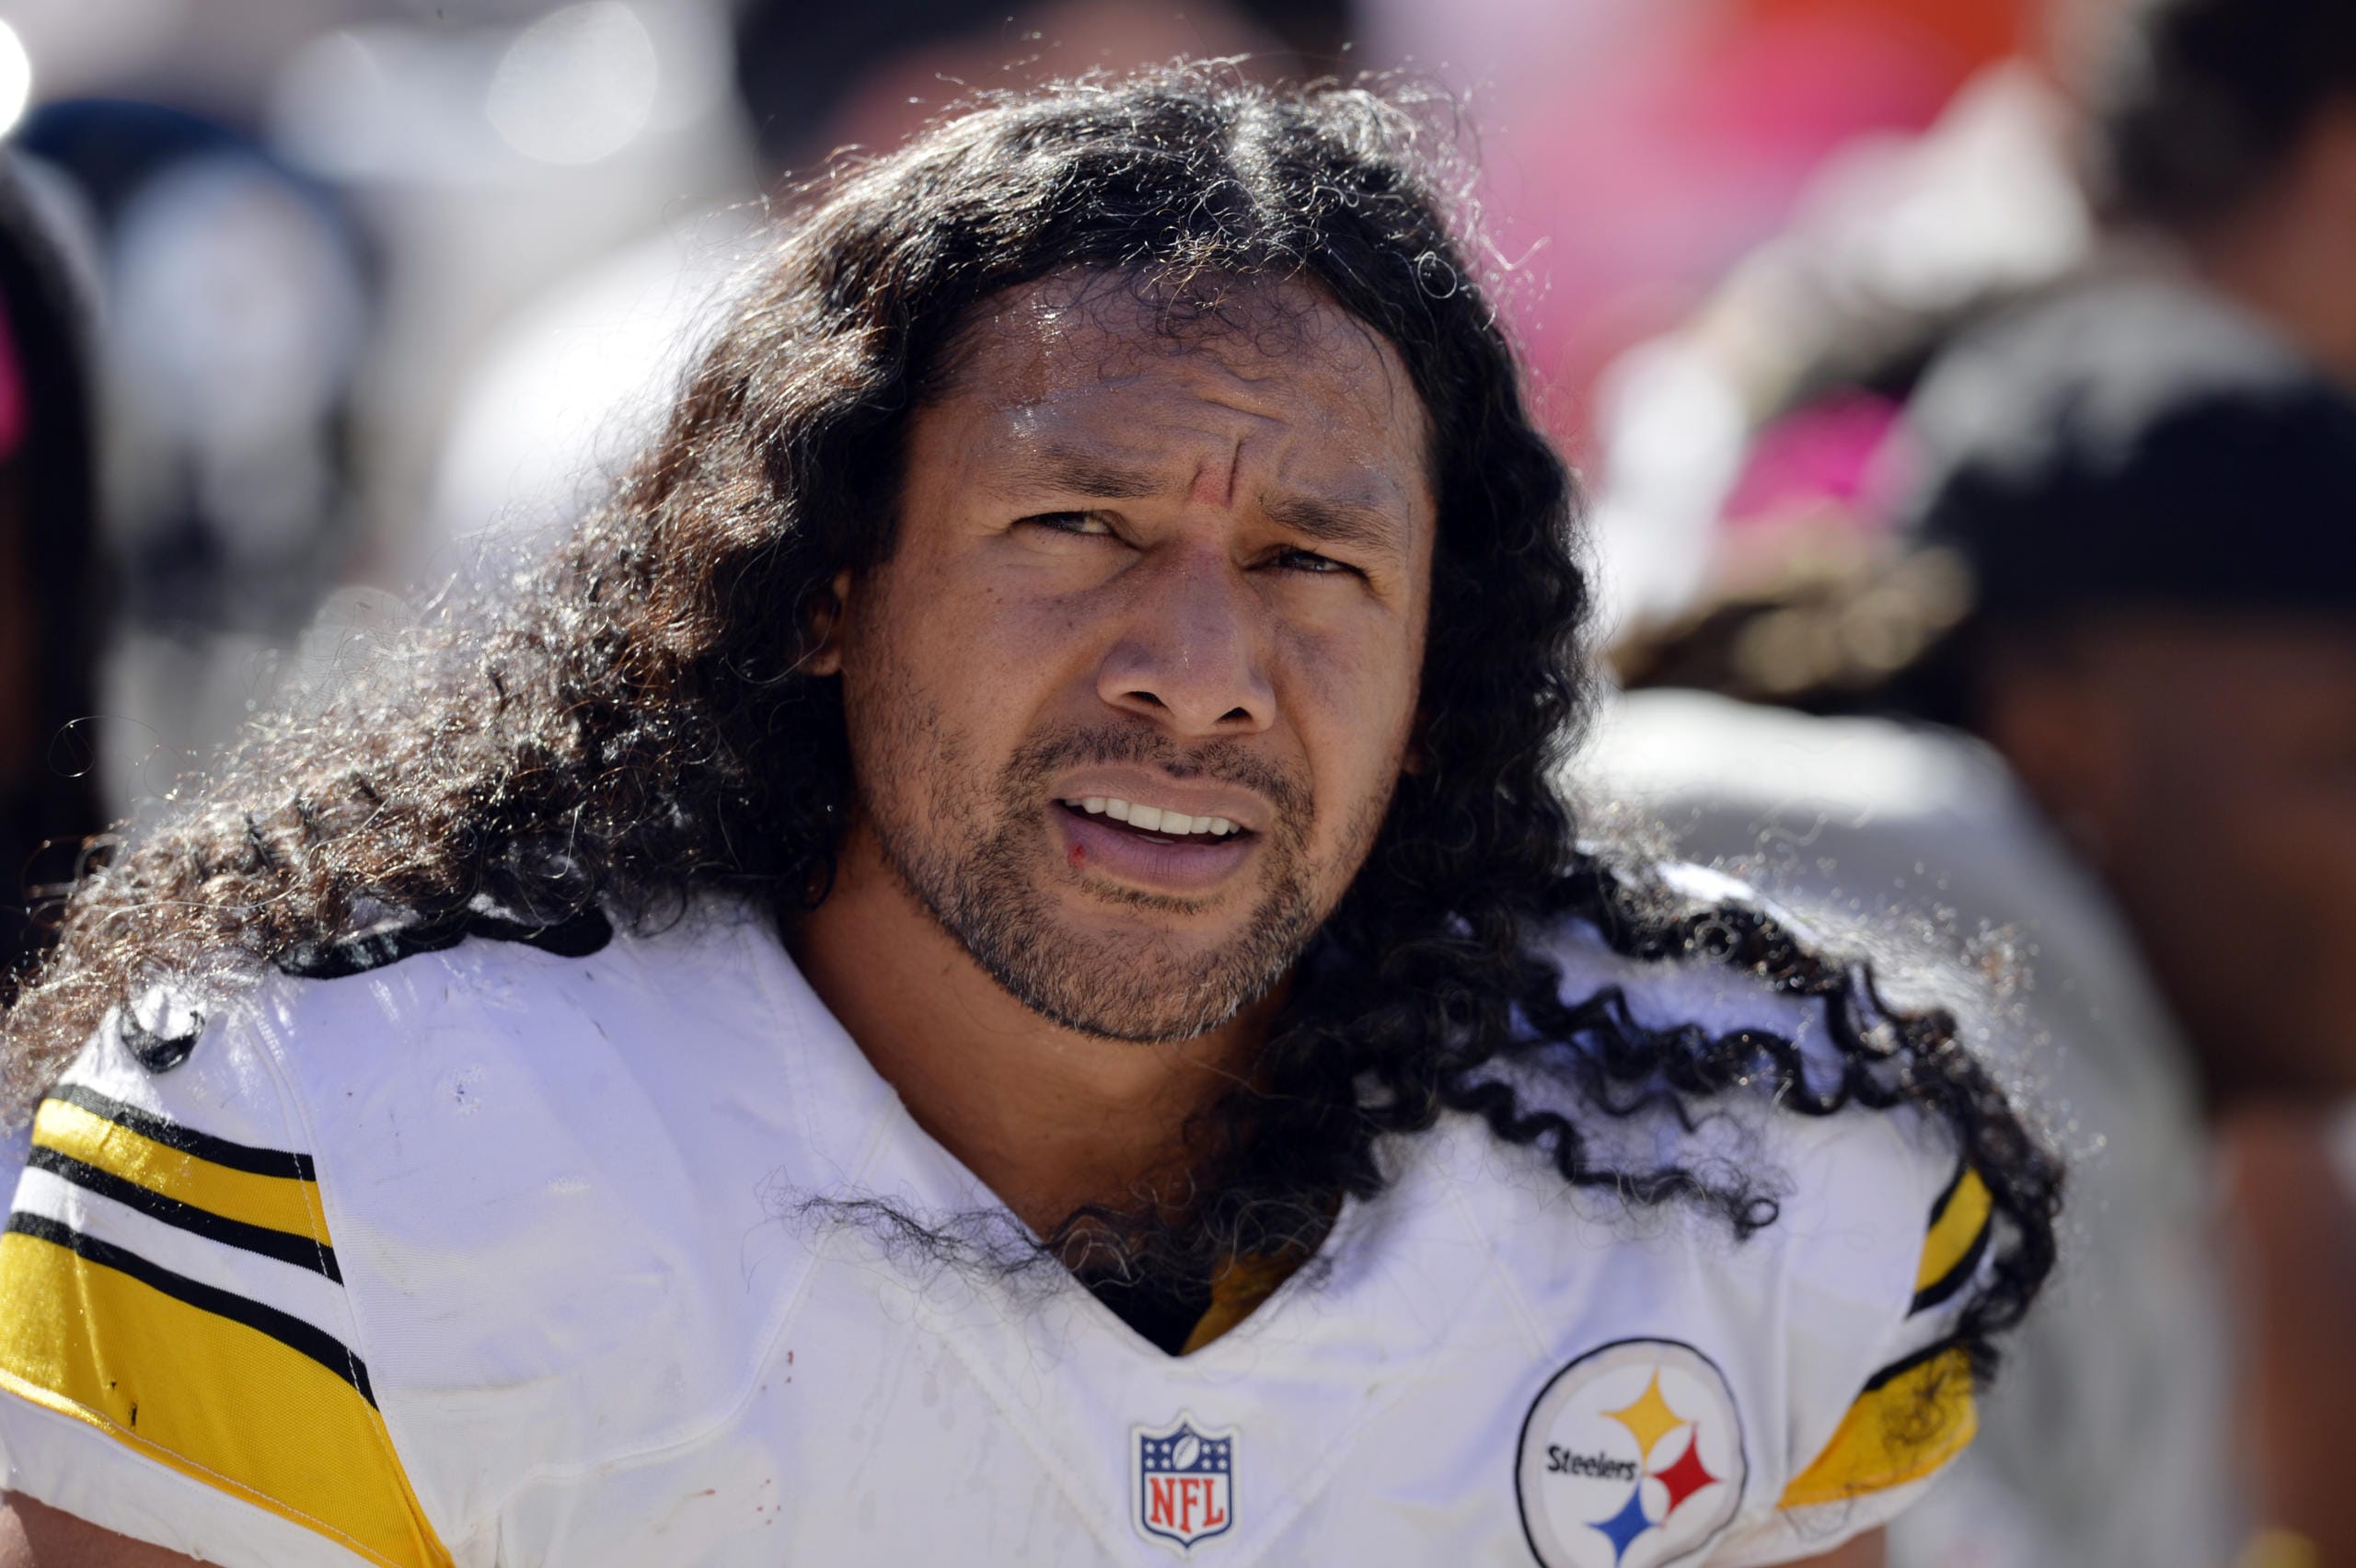 Pittsburgh Steelers strong safety Troy Polamalu was elected to the Pro Football Hall of Fame as part of the Class of 2020, it was announced on Saturday, Feb. 2020.